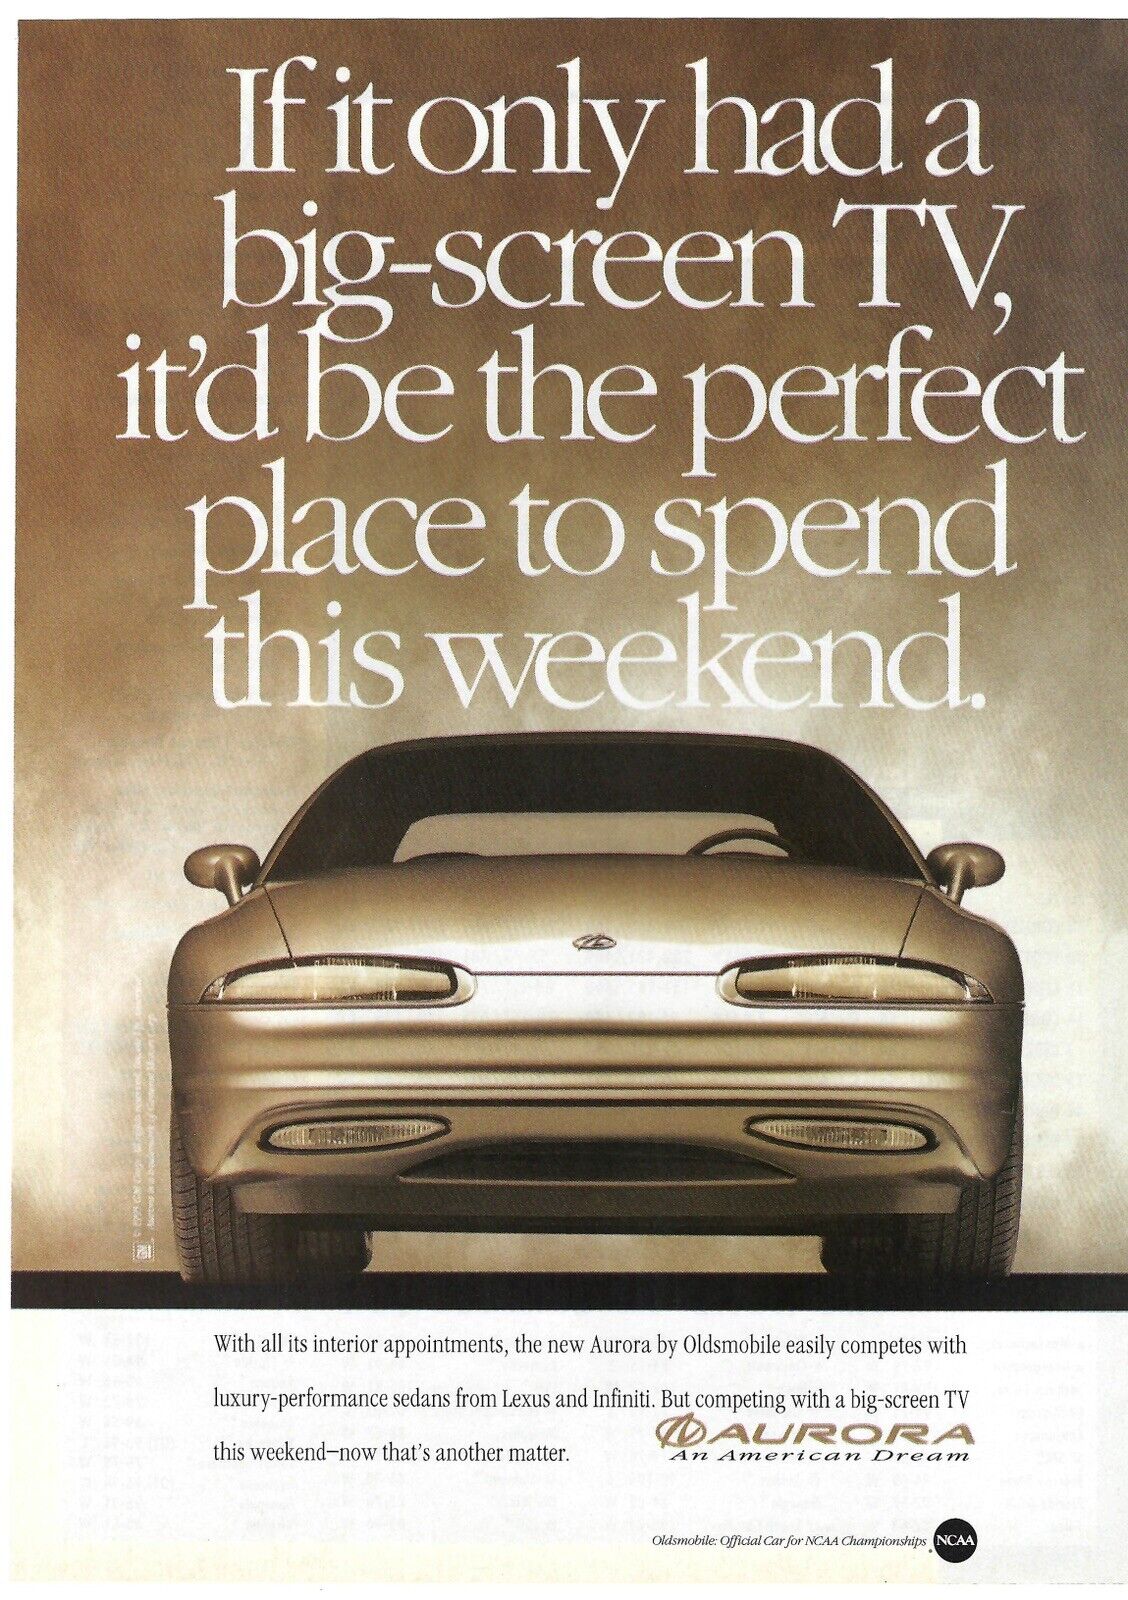 1995 Oldsmobile Aurora Perfect Place To Spend This Weekend Vtg Print Ad/Poster